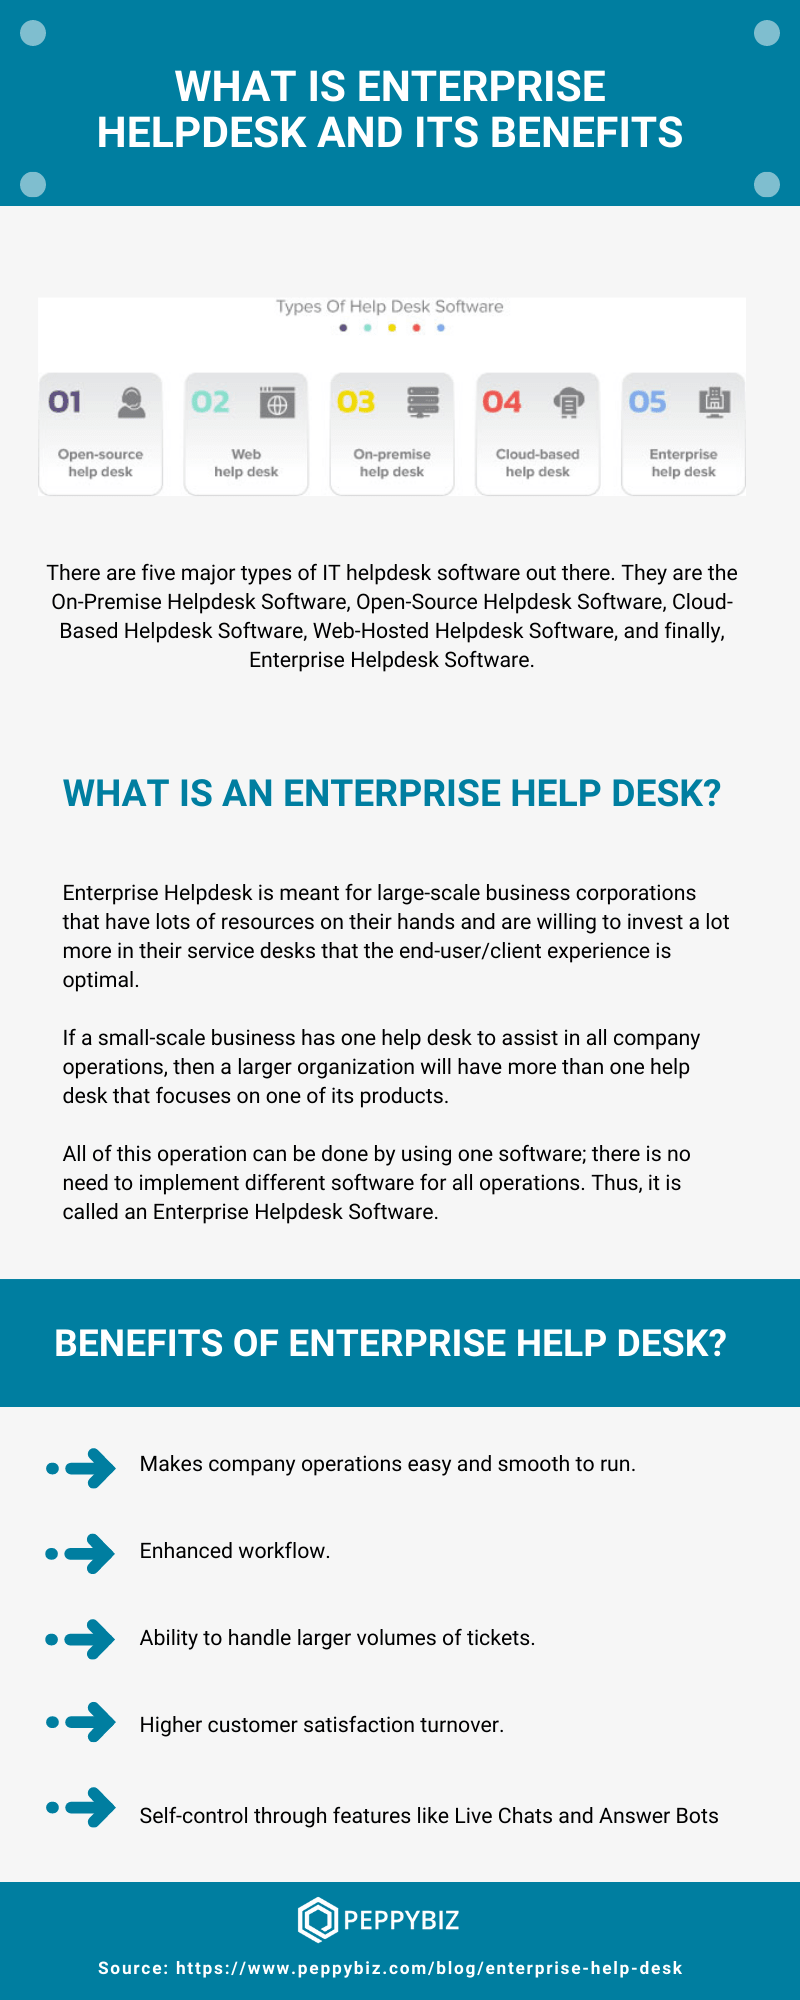 What is Enterprise Helpdesk and its benefits